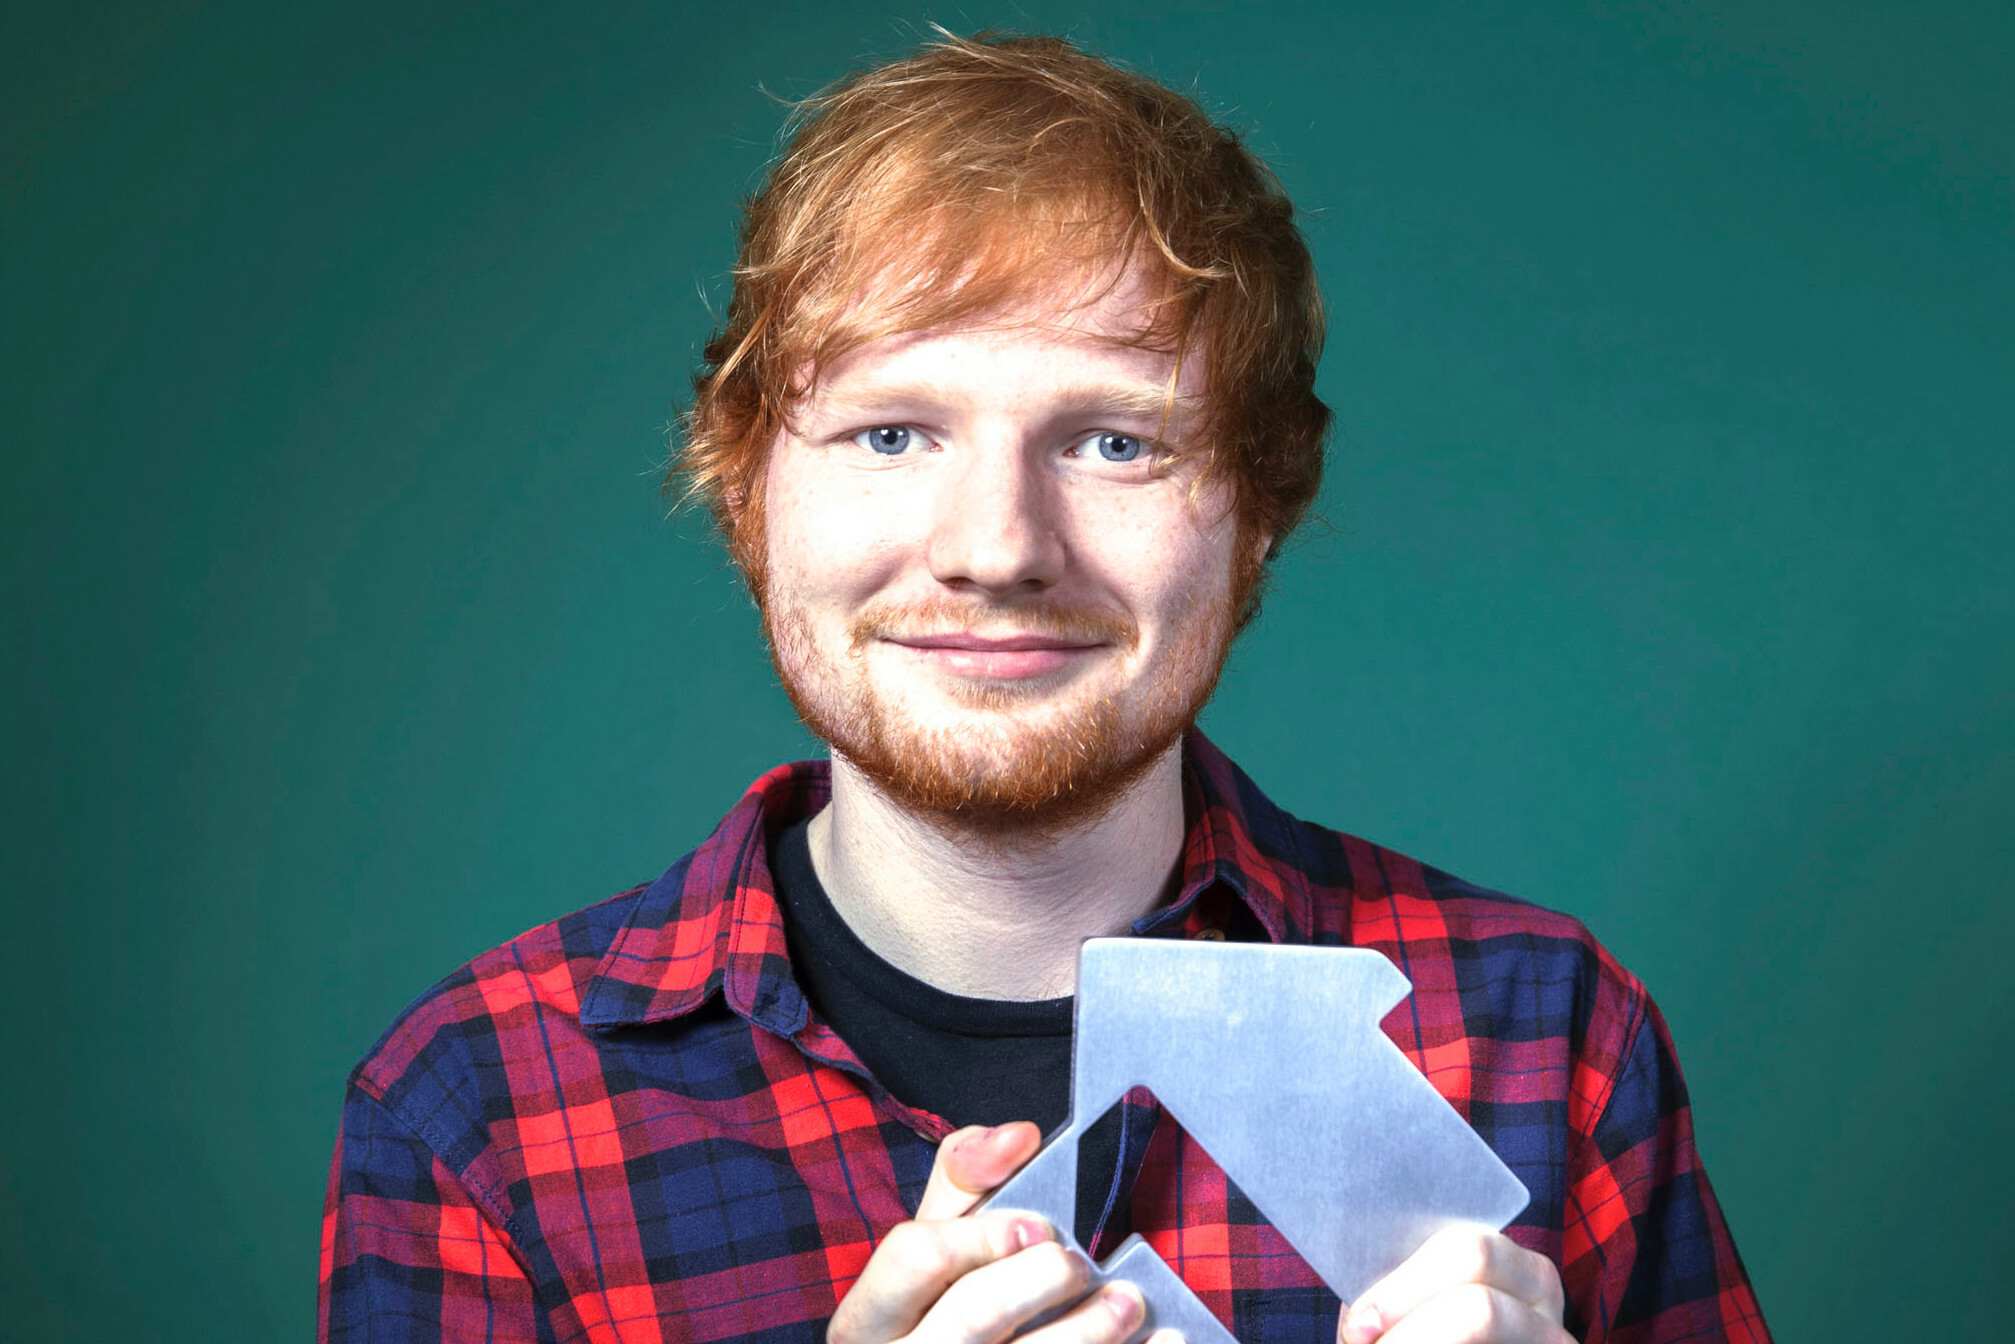 Ed Sheeran: "One" was released on 16 May 2014 as the first promotional single from x. 2020x1350 HD Background.